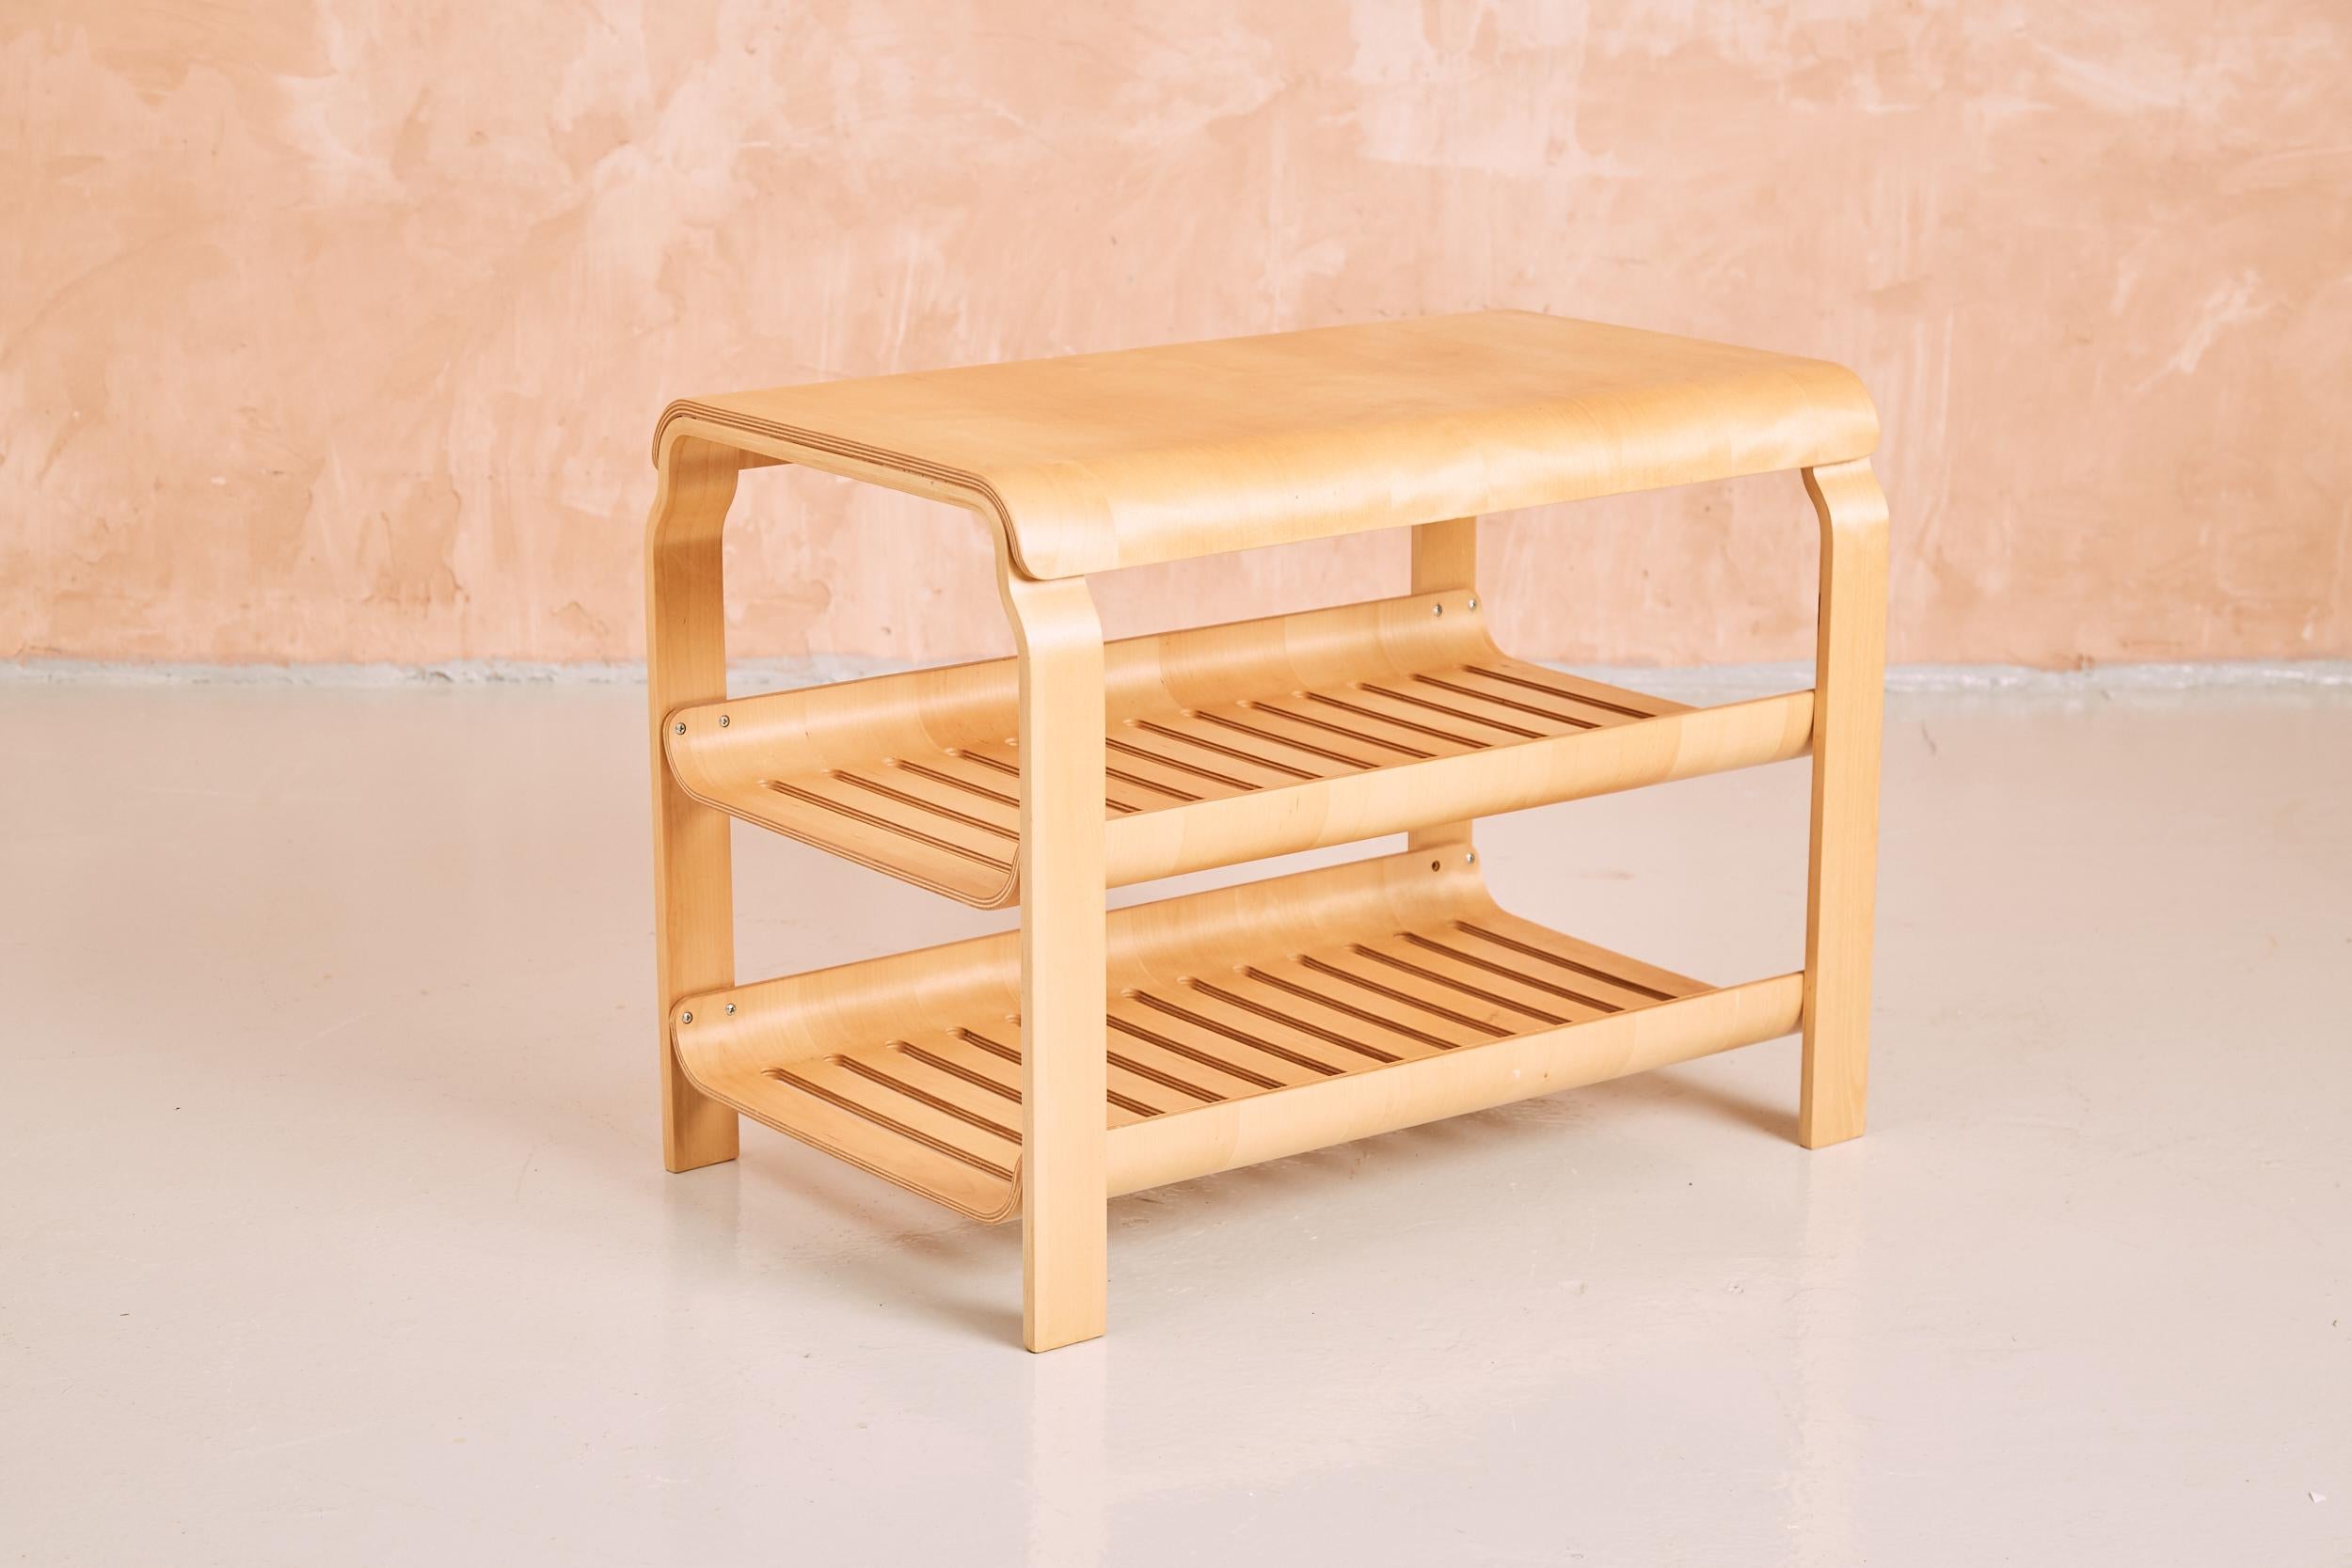 Excellent example of 80's Swedish design, utilising bent birch ply with its crisp golden tone and smooth finish. An elegant piece that incorporates two lower tiers that are softened with scooped edges and a slatted surface. The delightful felicitous